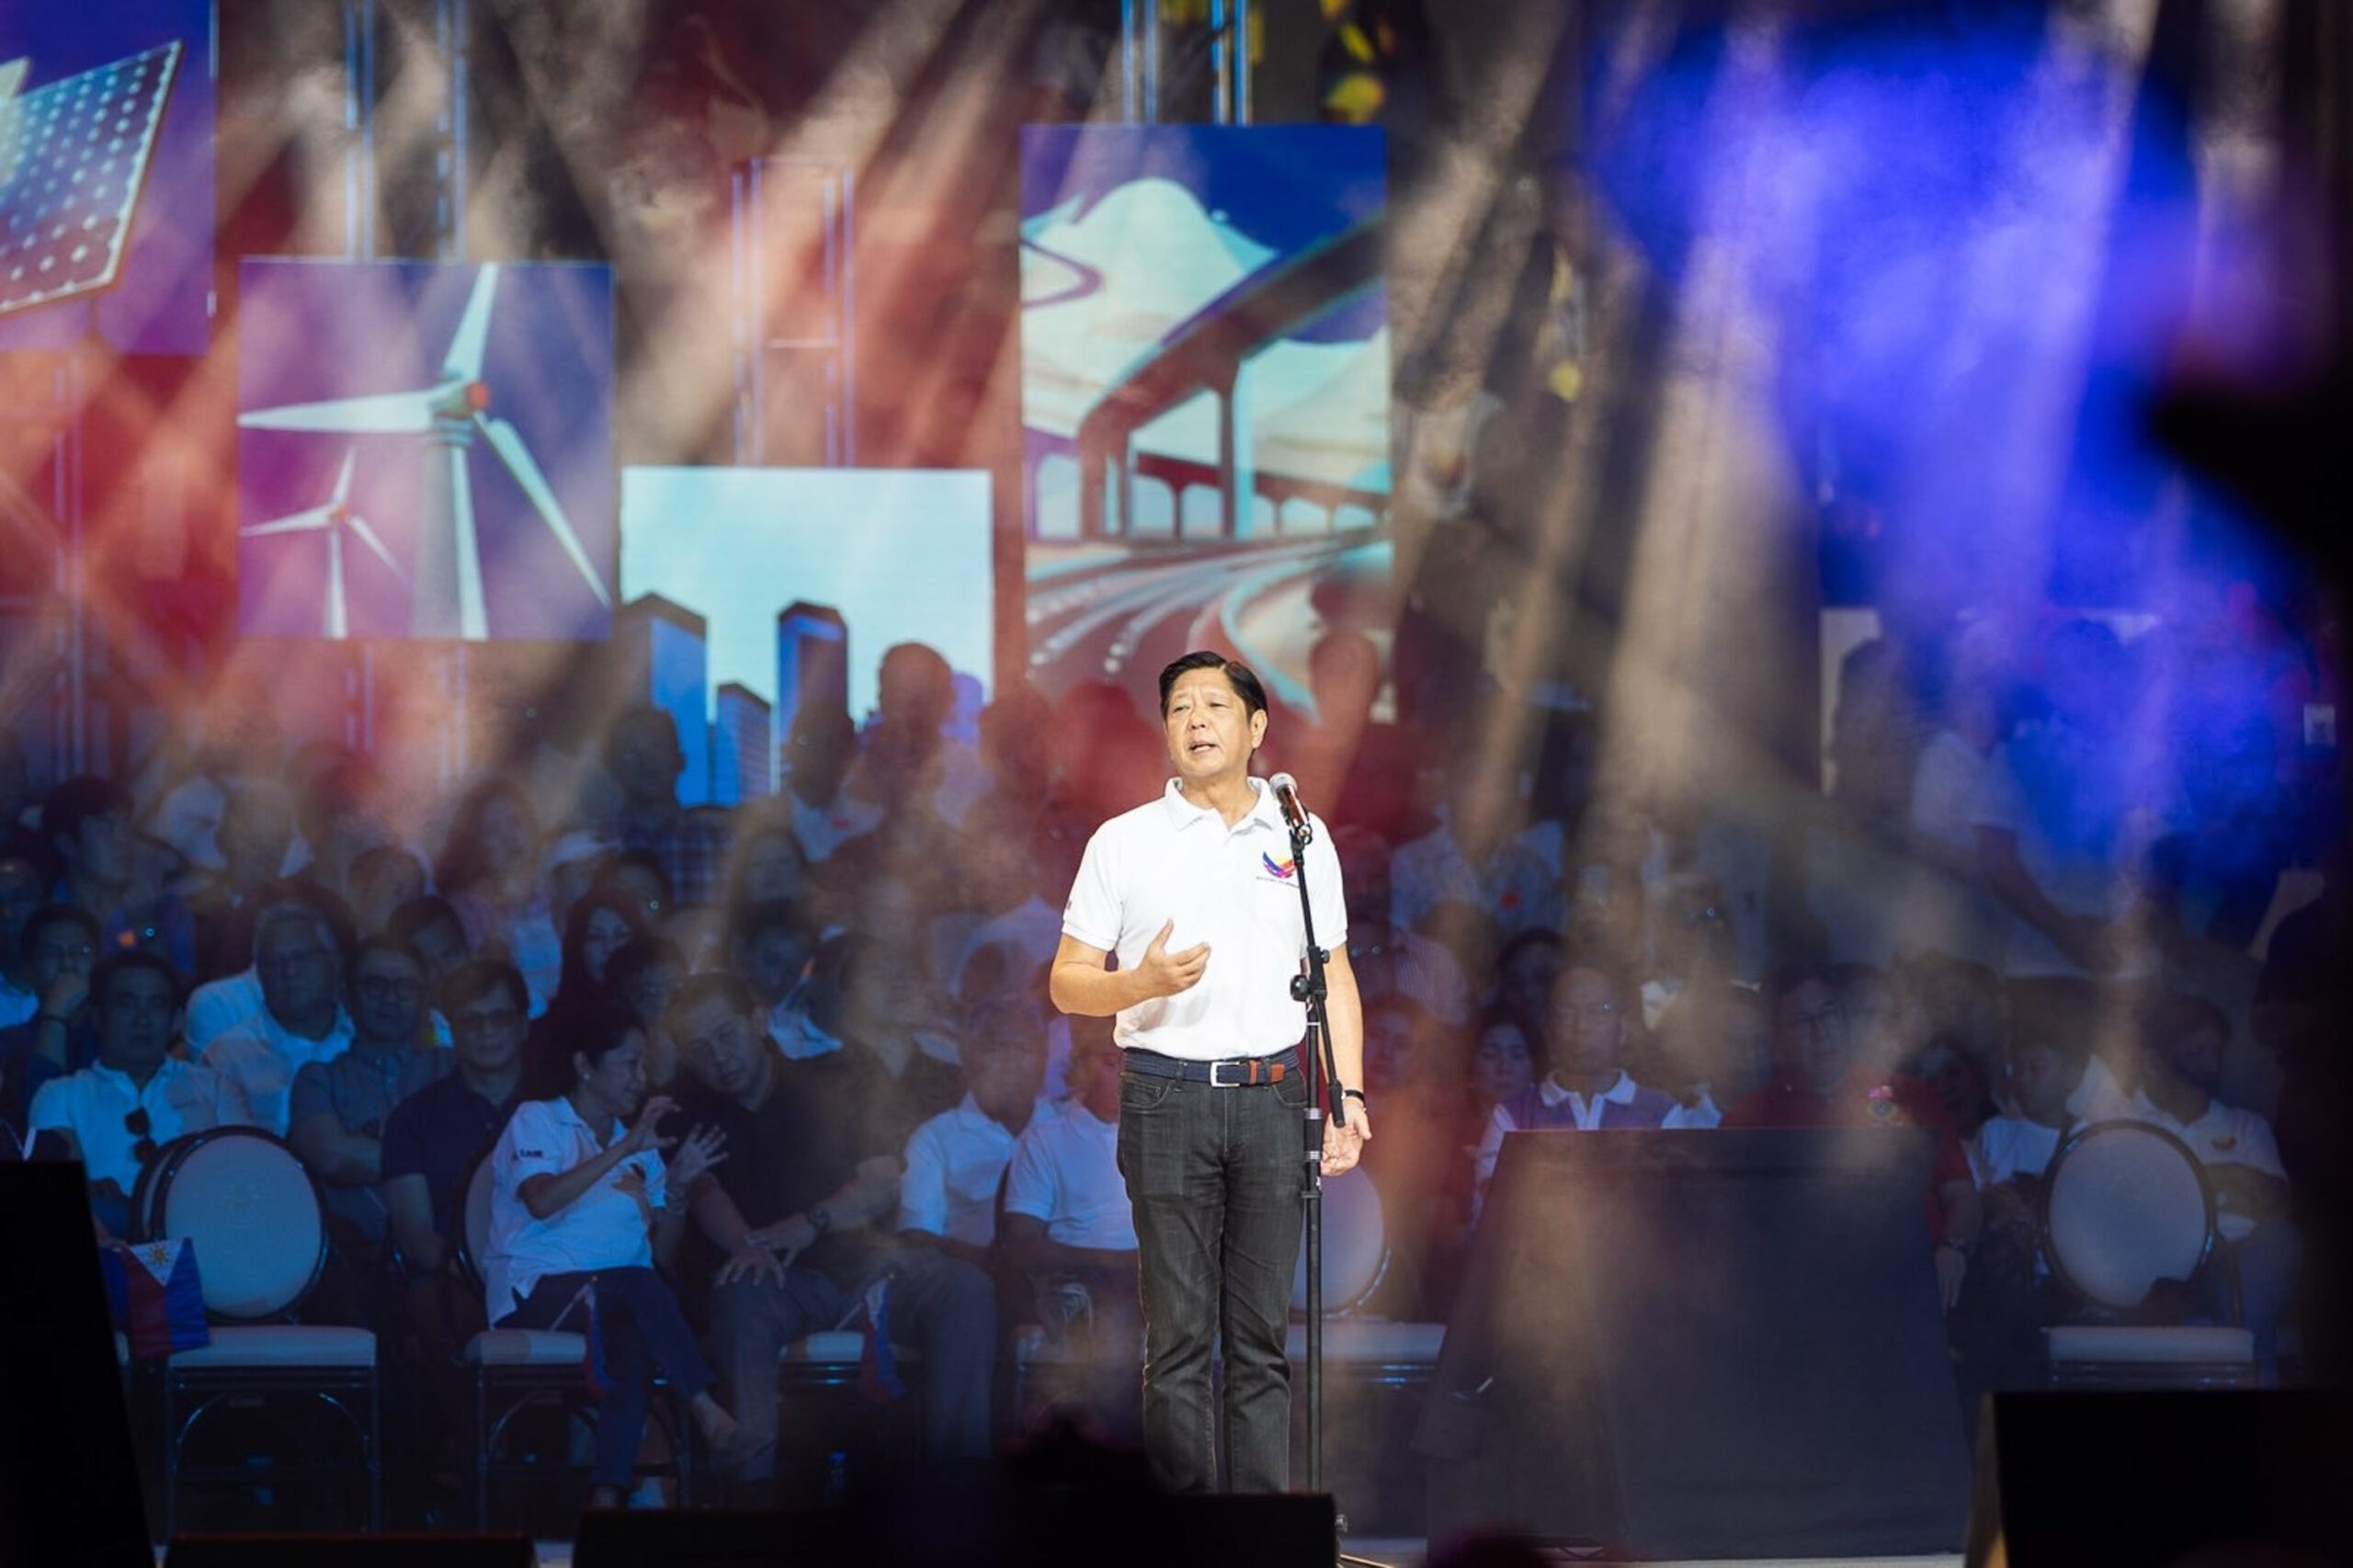 To promise a ‘Bagong Pilipinas,’ Marcos held a concert that cost at least P16 million